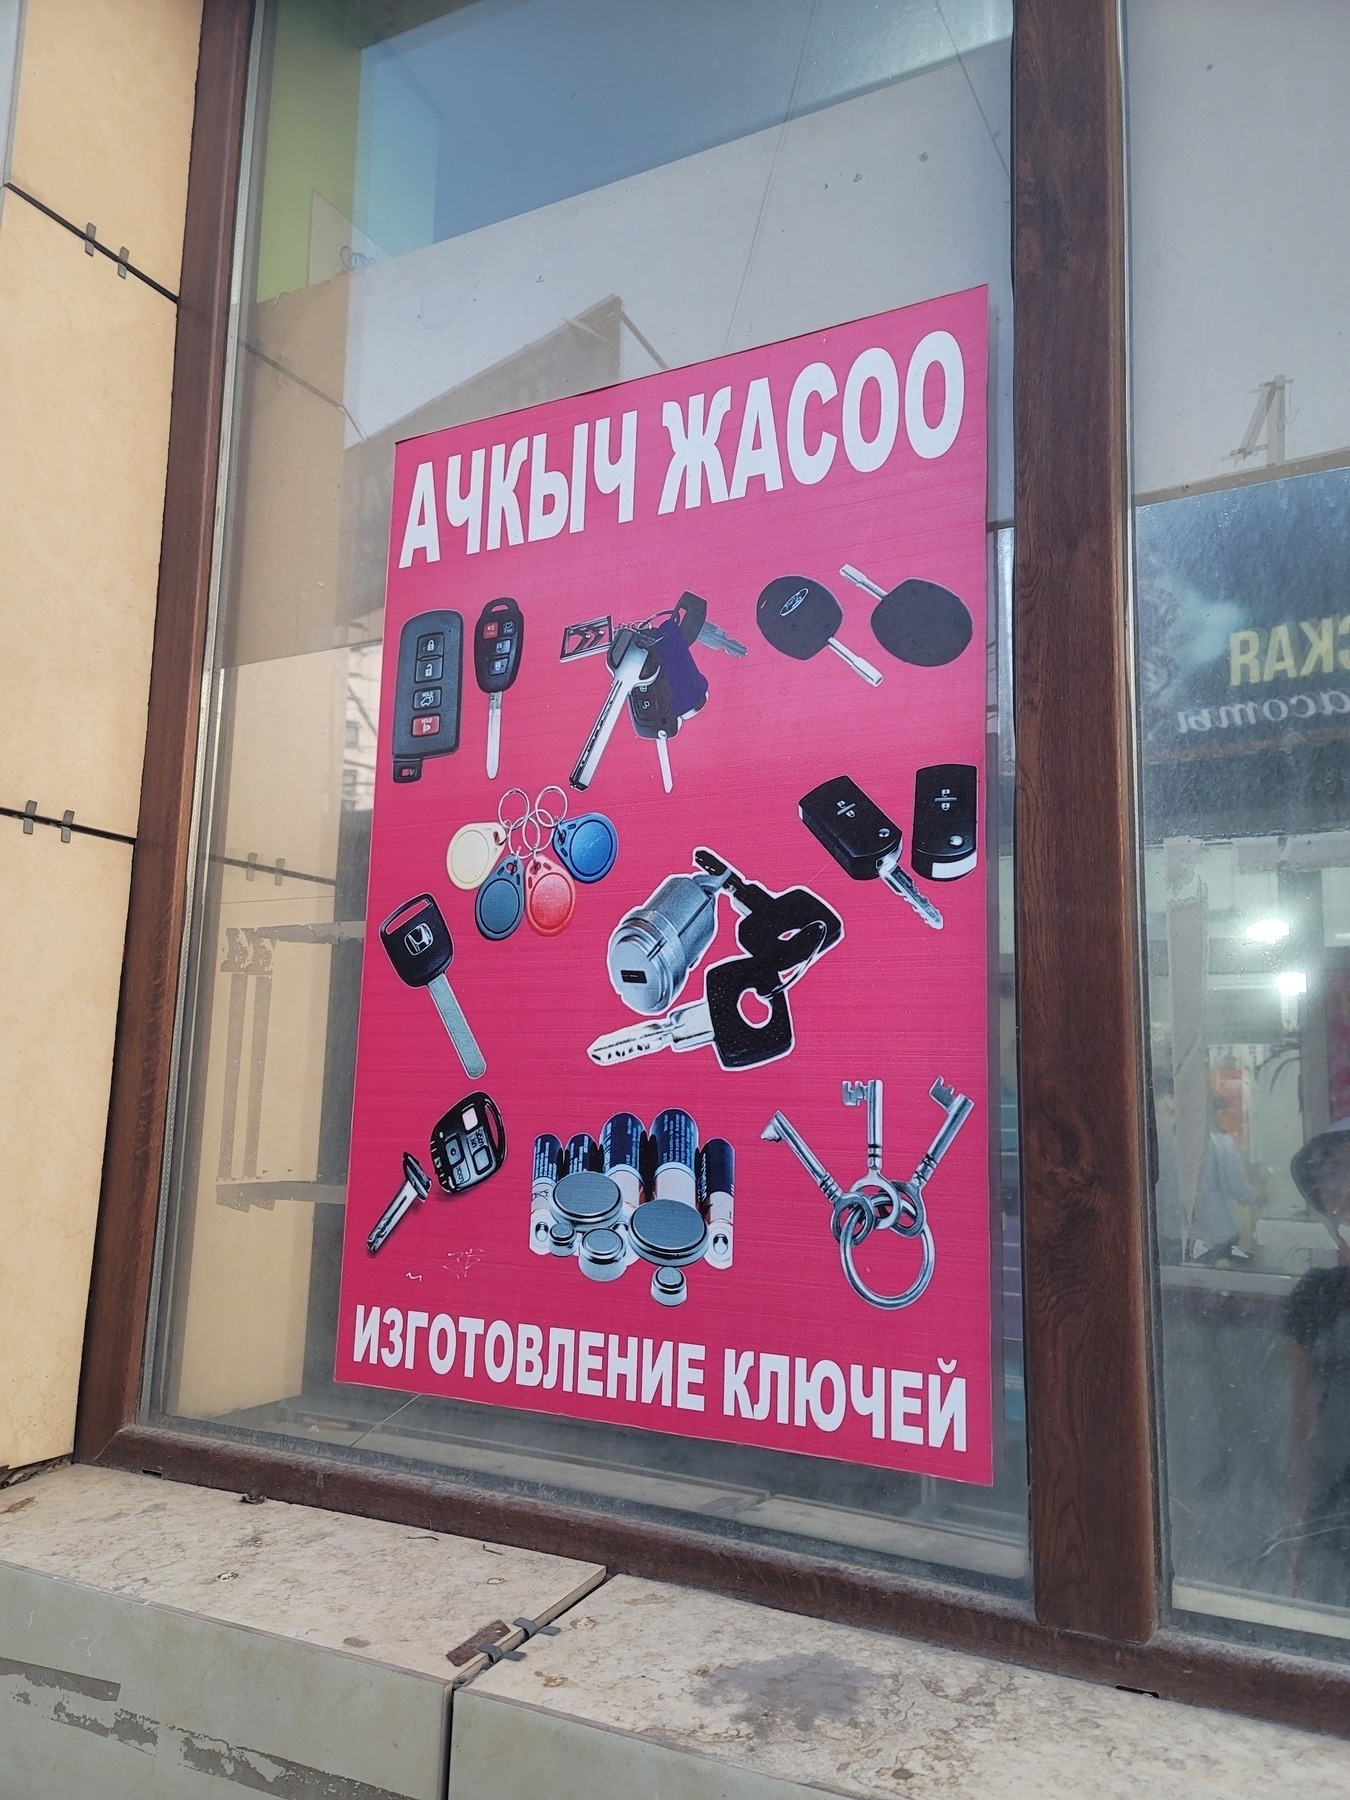 red sign with white text on the top reading 'make keys' in Kyrgyz, white text on bottom with the same in Russian, and pictures of keys in the middle